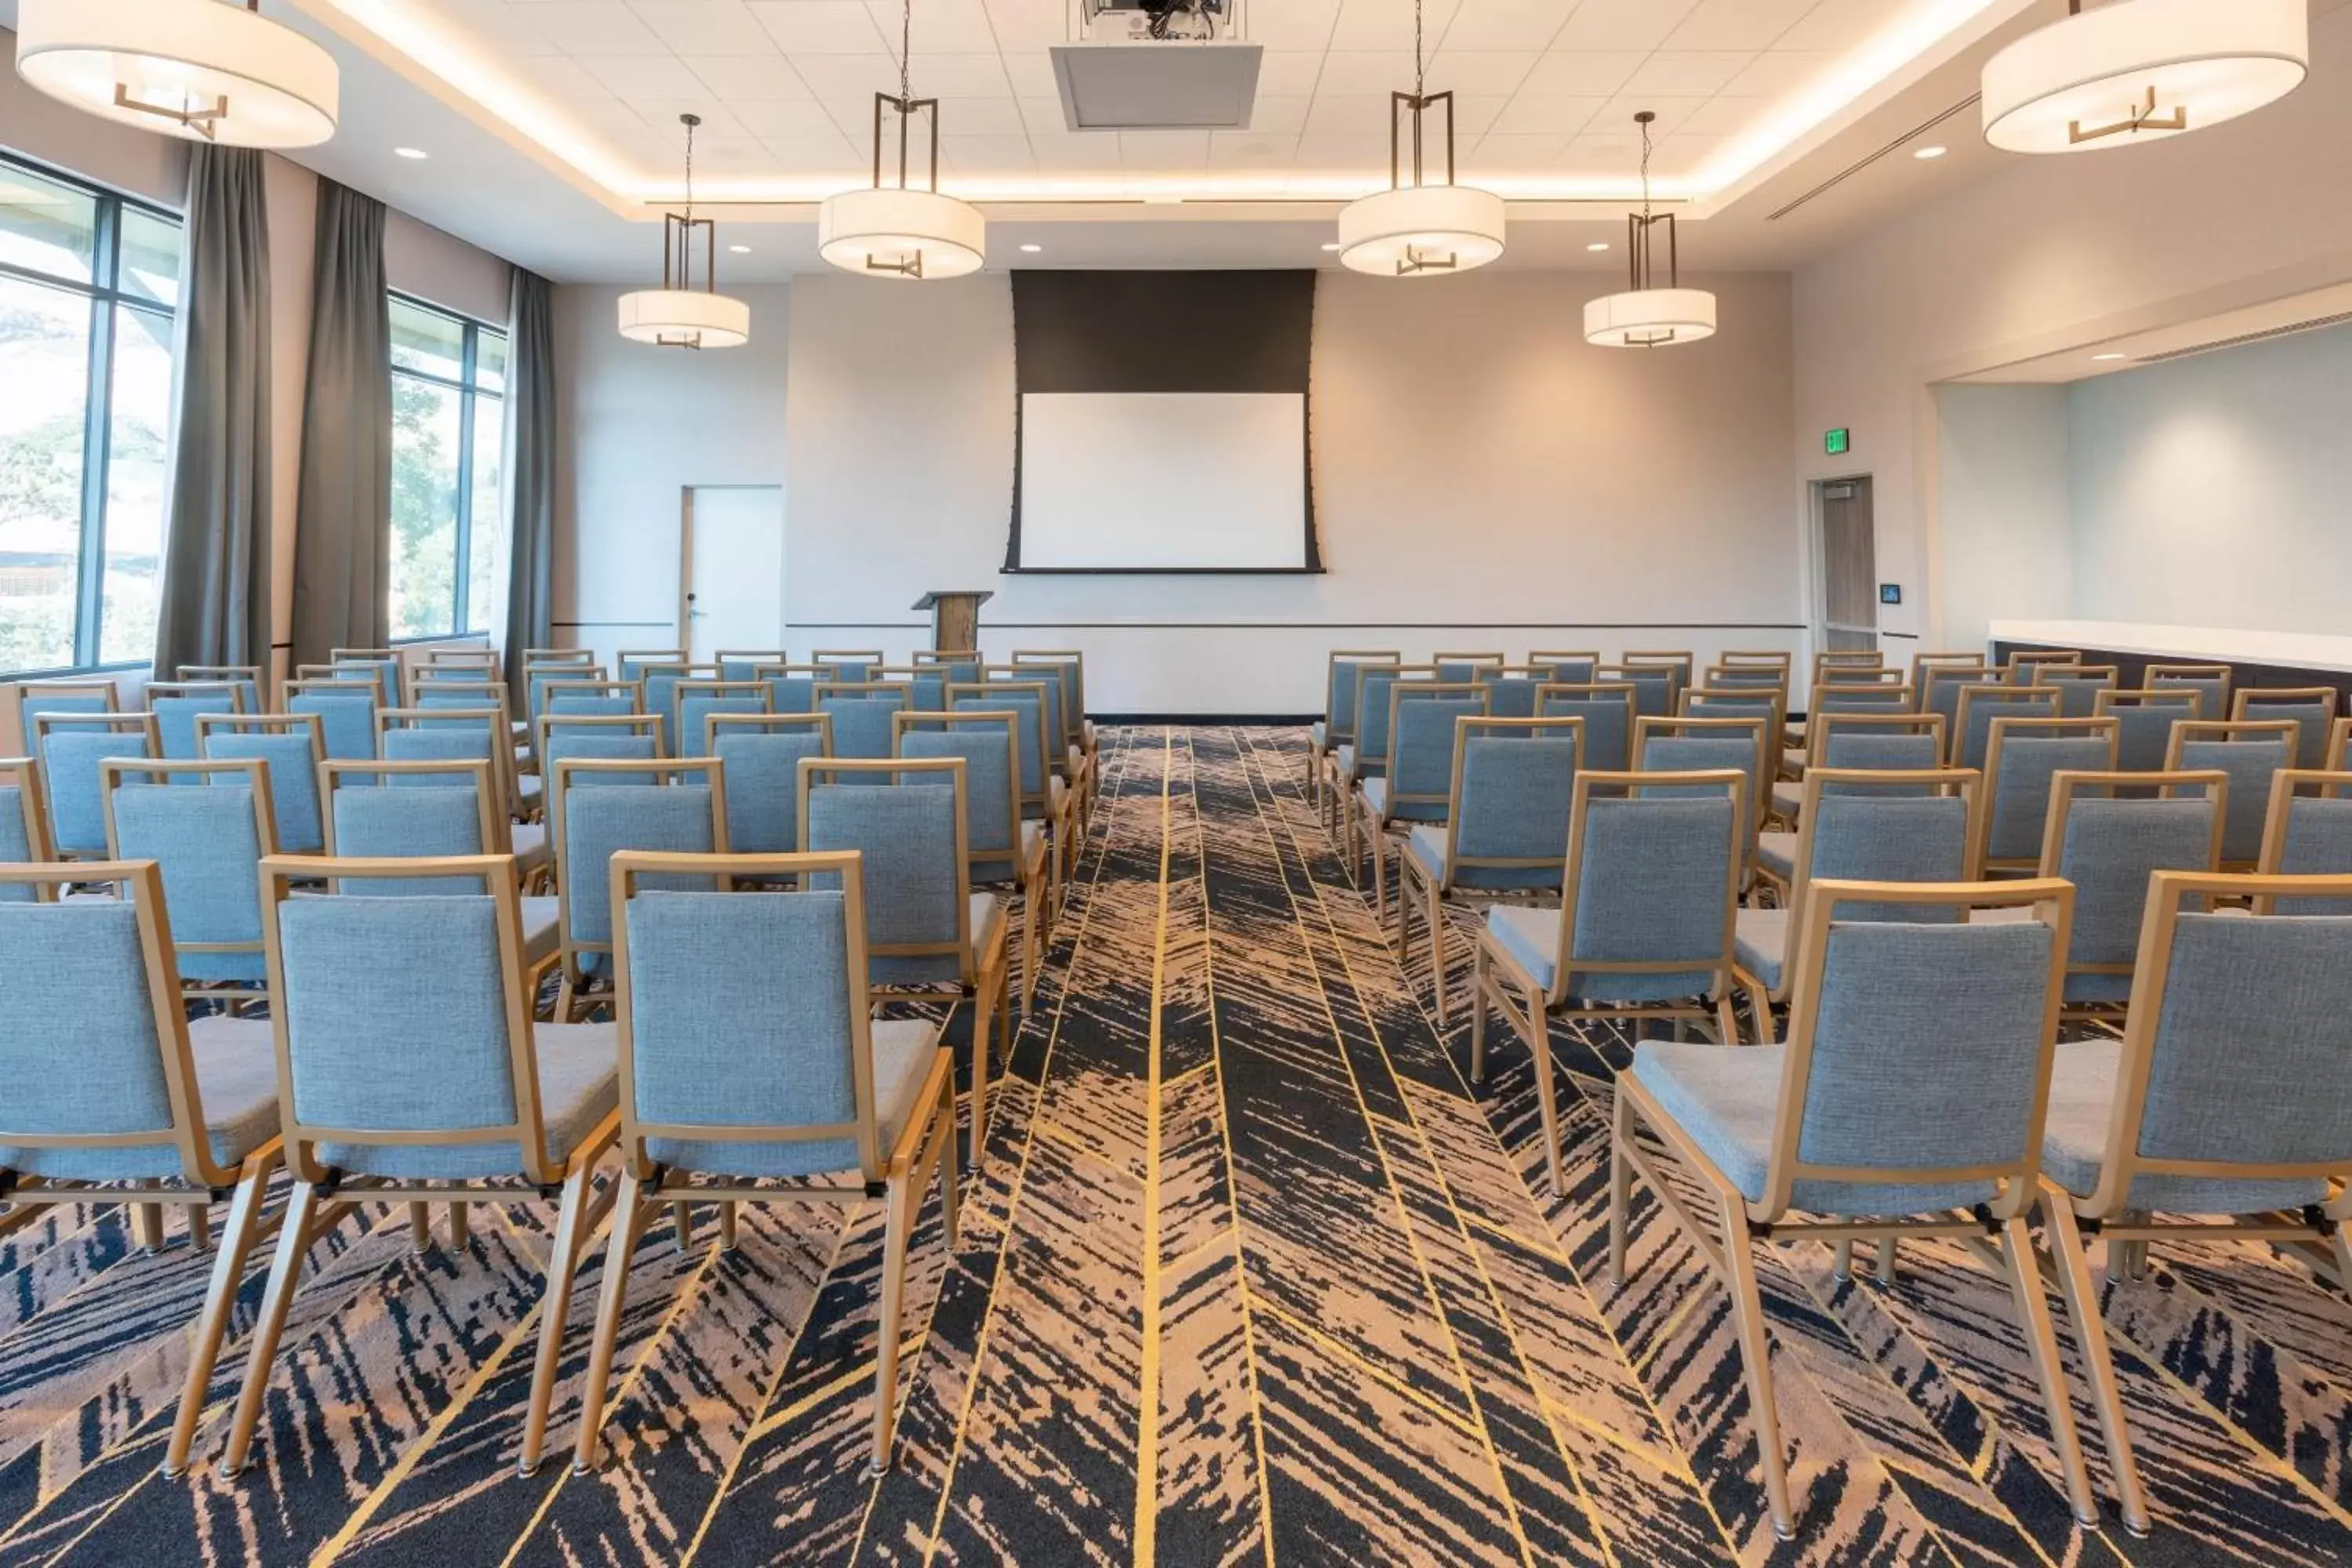 Meeting/conference room in Courtyard by Marriott Thousand Oaks Agoura Hills